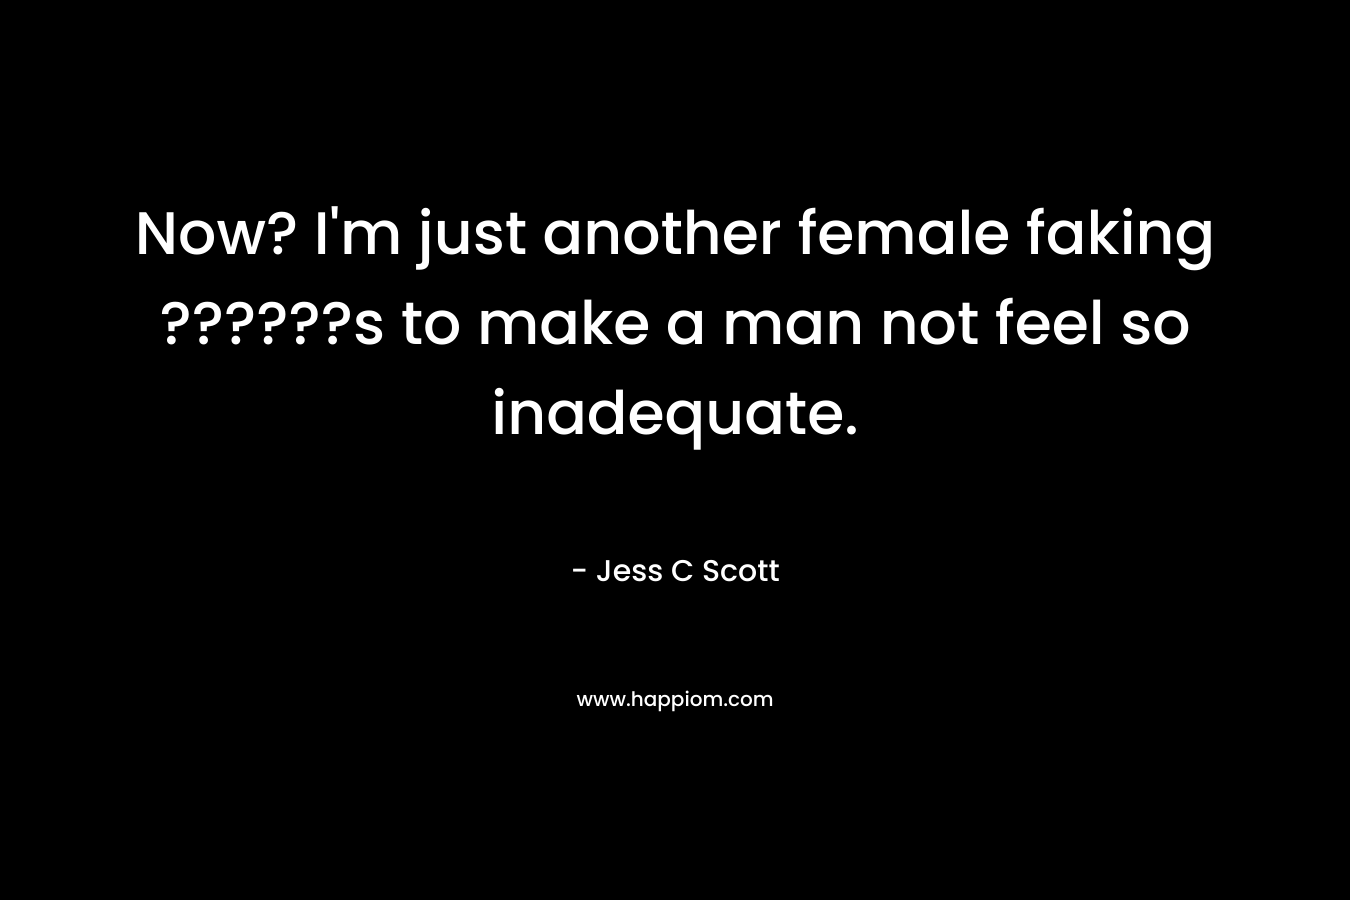 Now? I’m just another female faking ??????s to make a man not feel so inadequate. – Jess C Scott